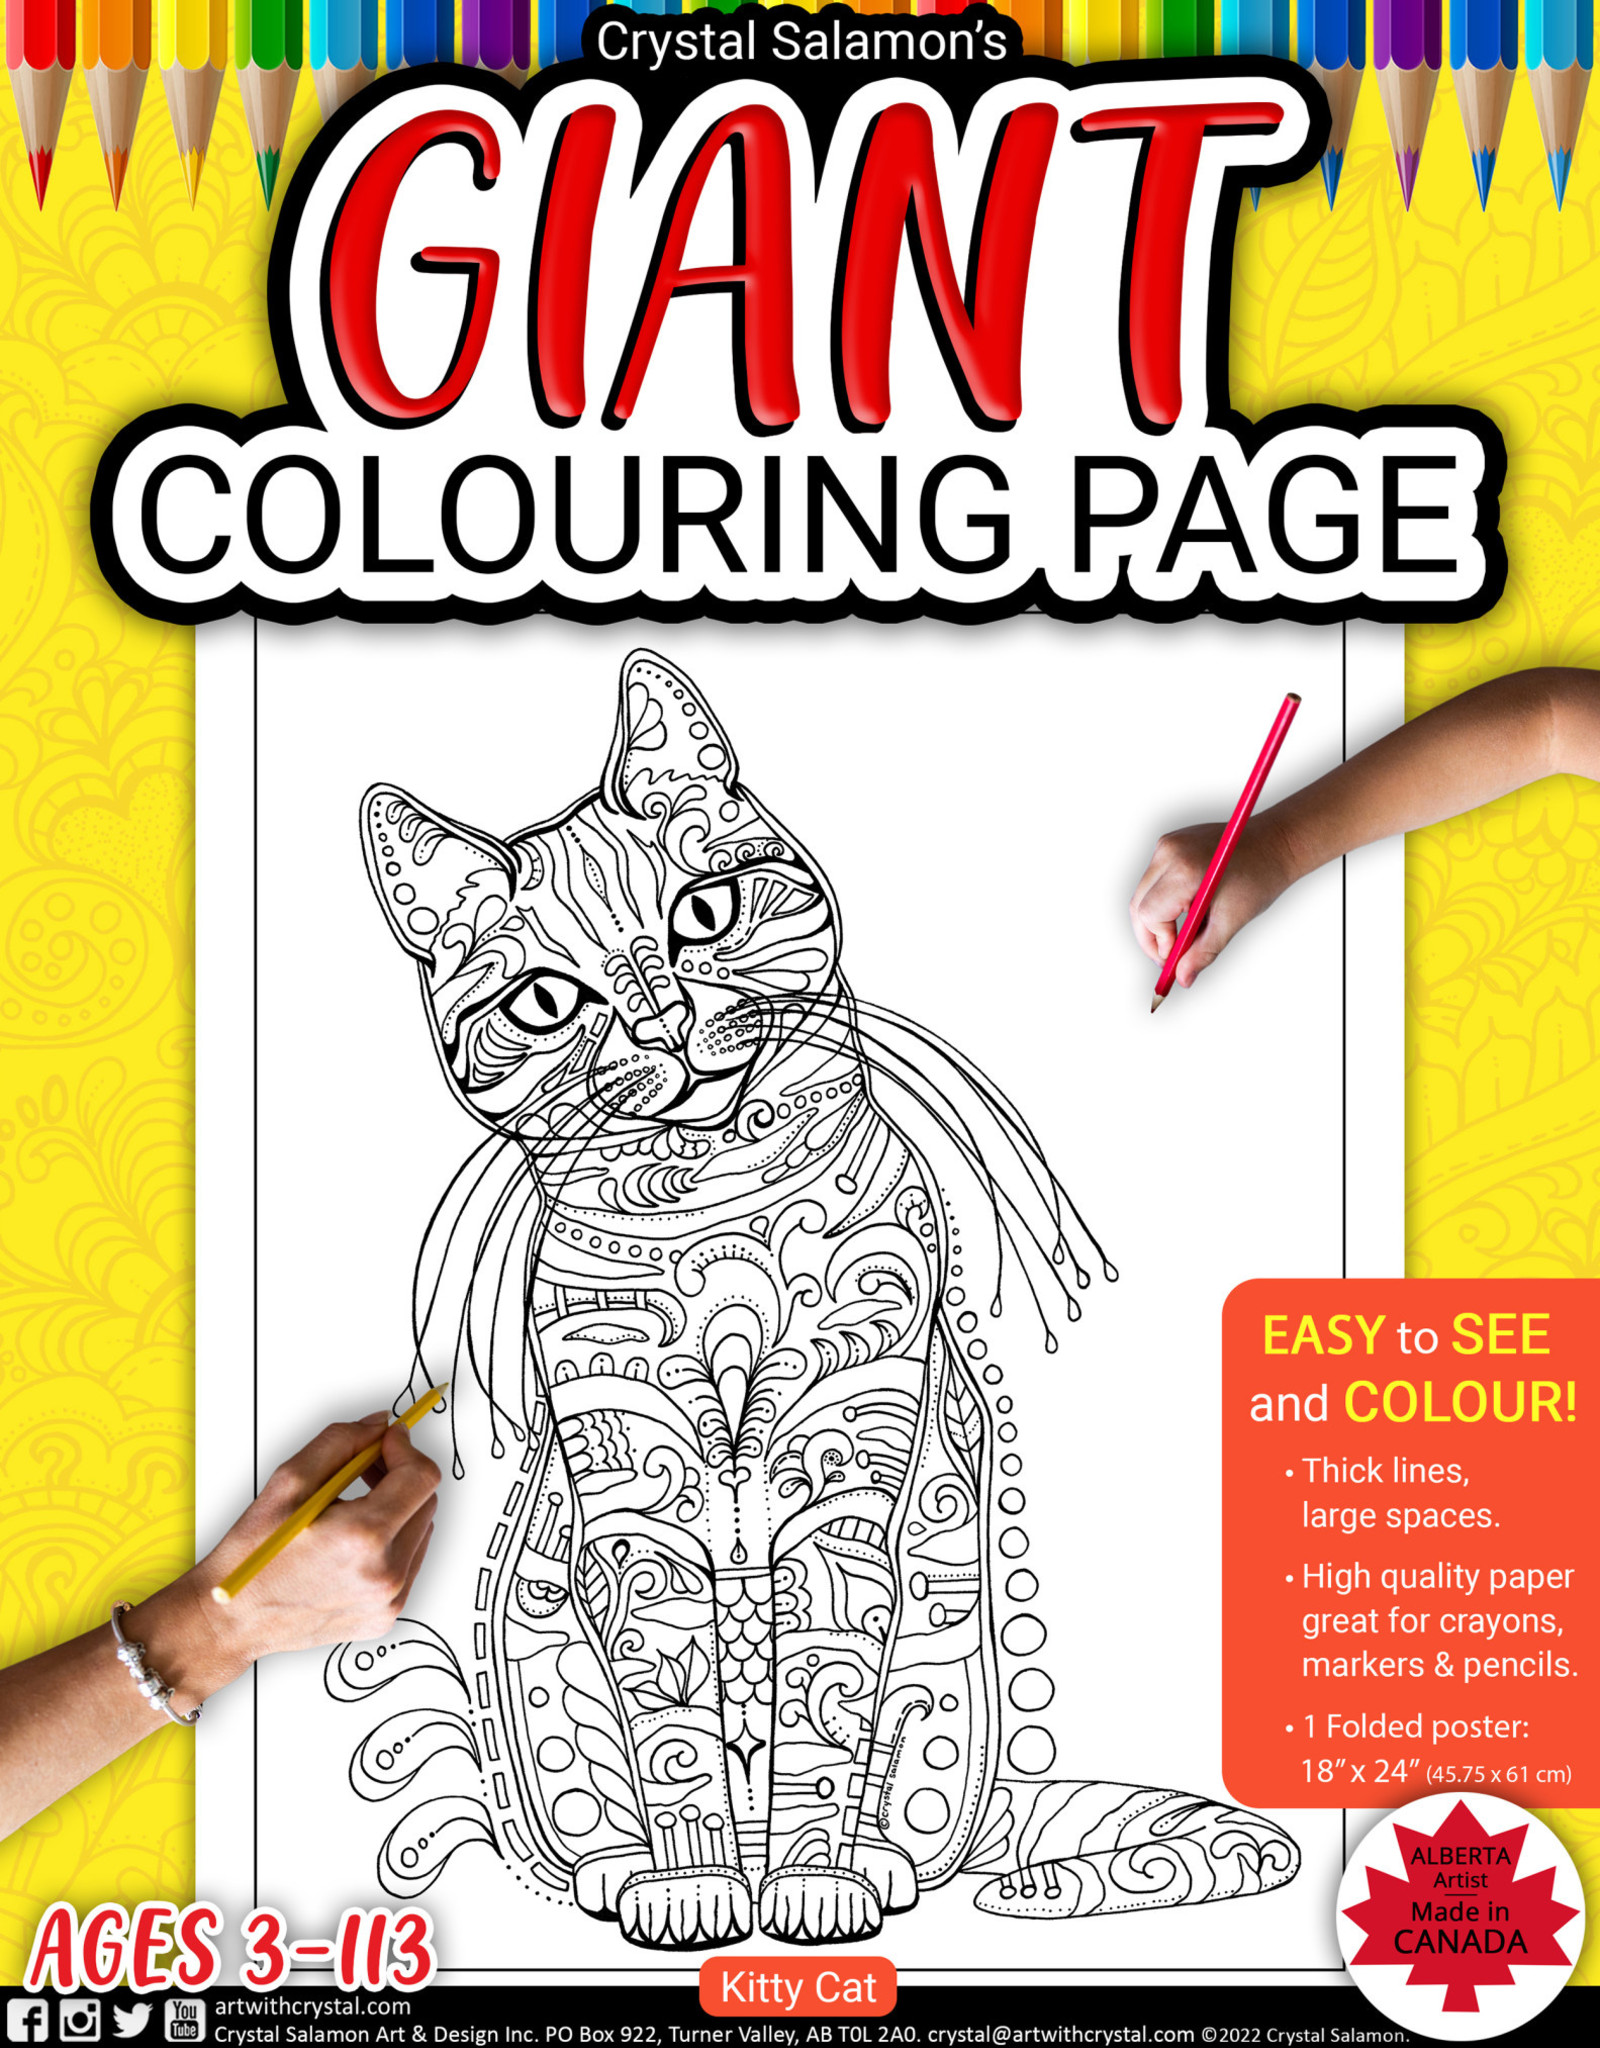 Crystal Salamon Giant Colouring Page - Kitty Cat 24" x 18"